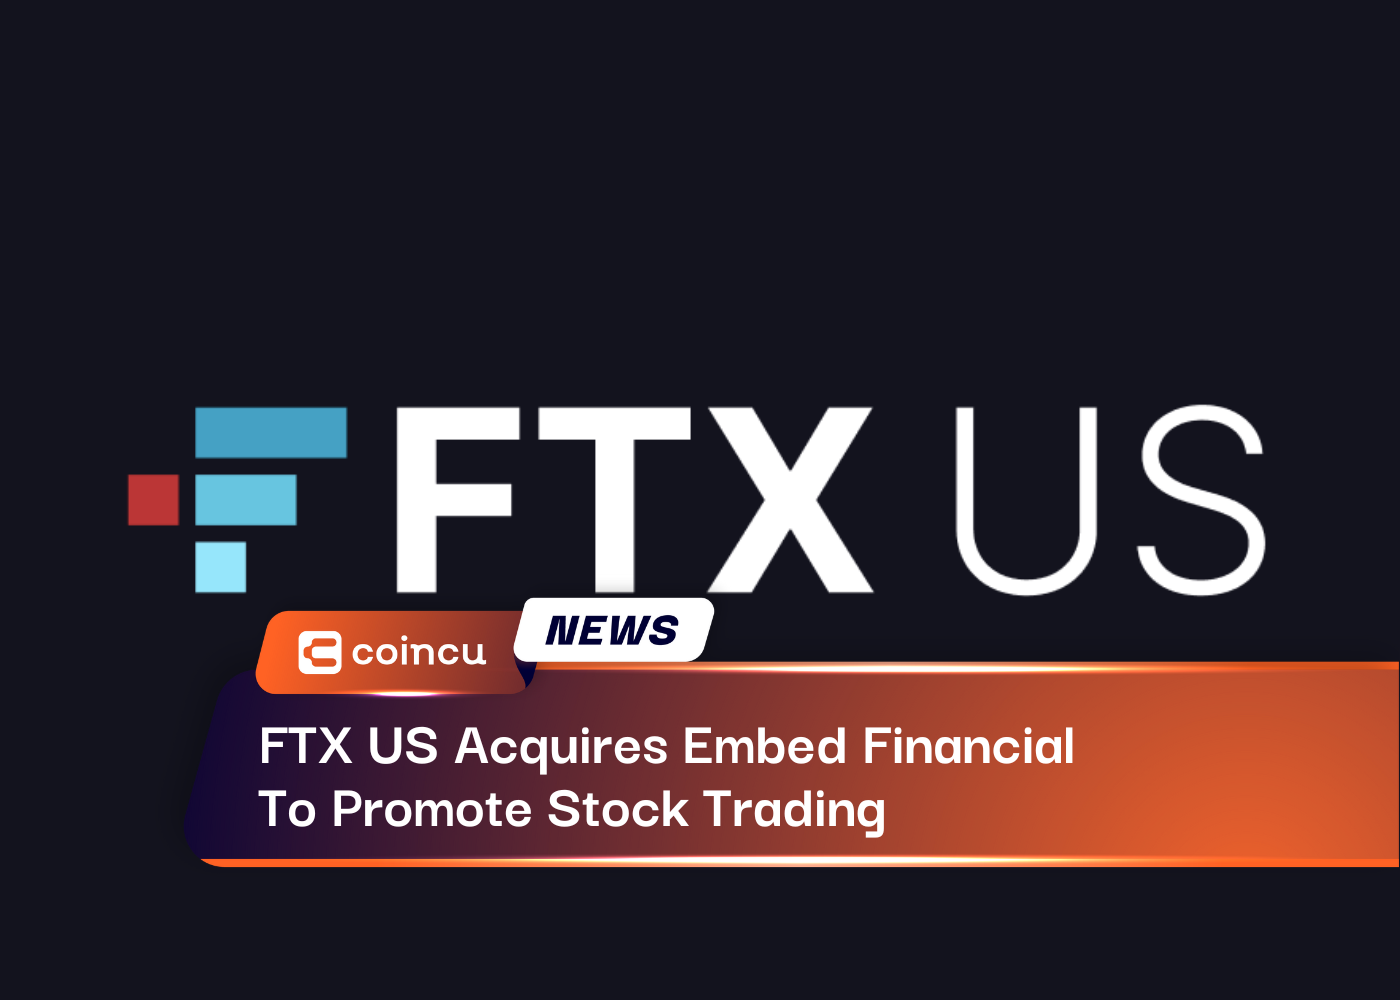 FTX US Acquires Embed Financial To Promote Stock Trading